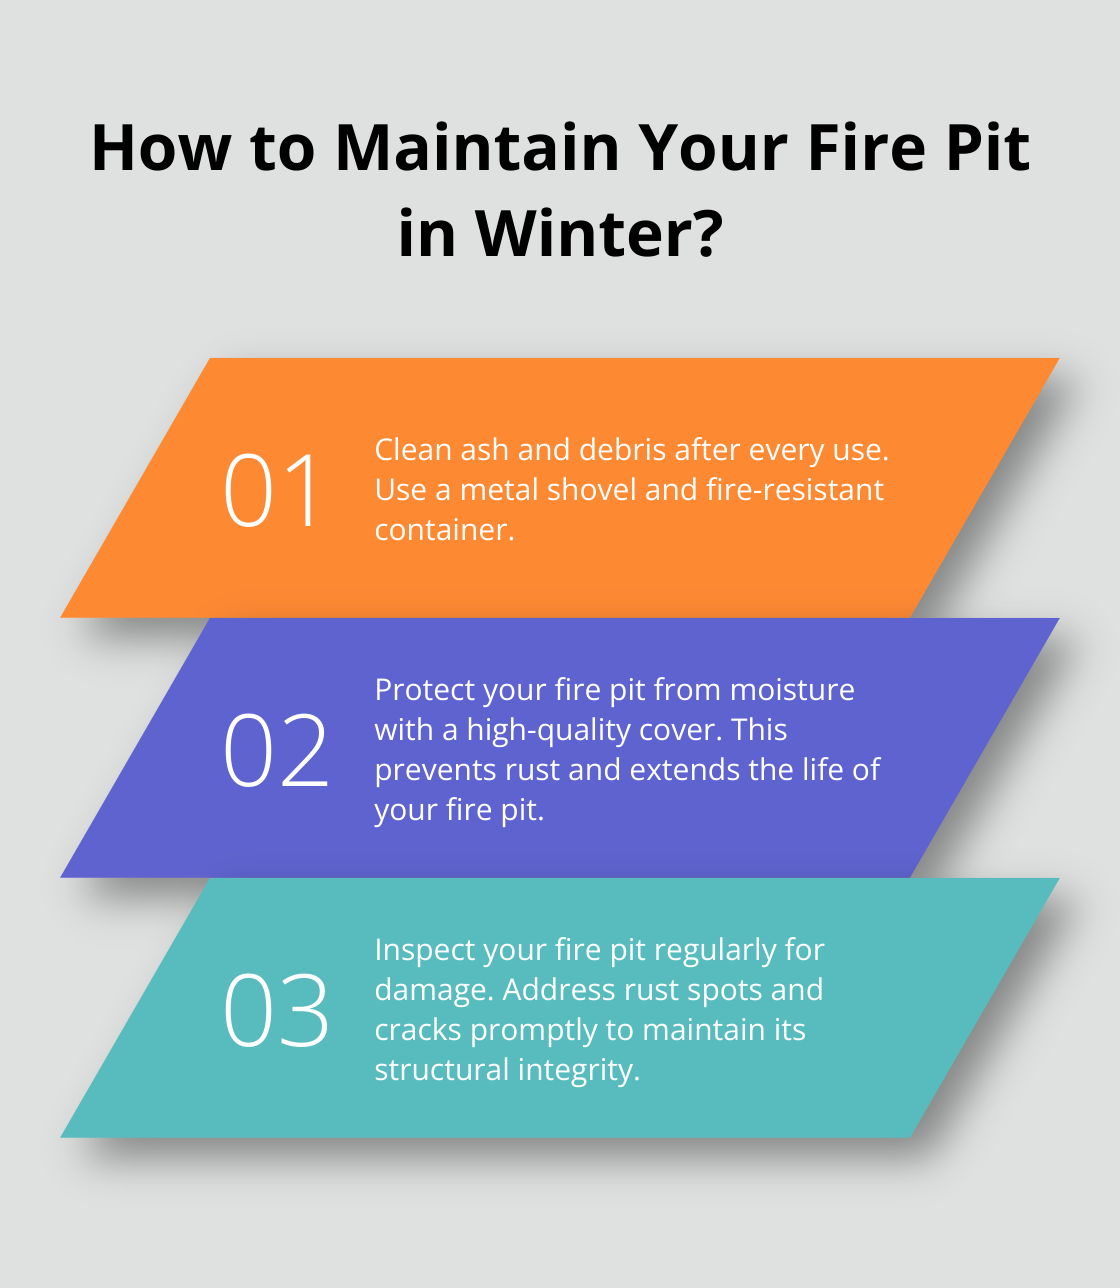 Fact - How to Maintain Your Fire Pit in Winter?